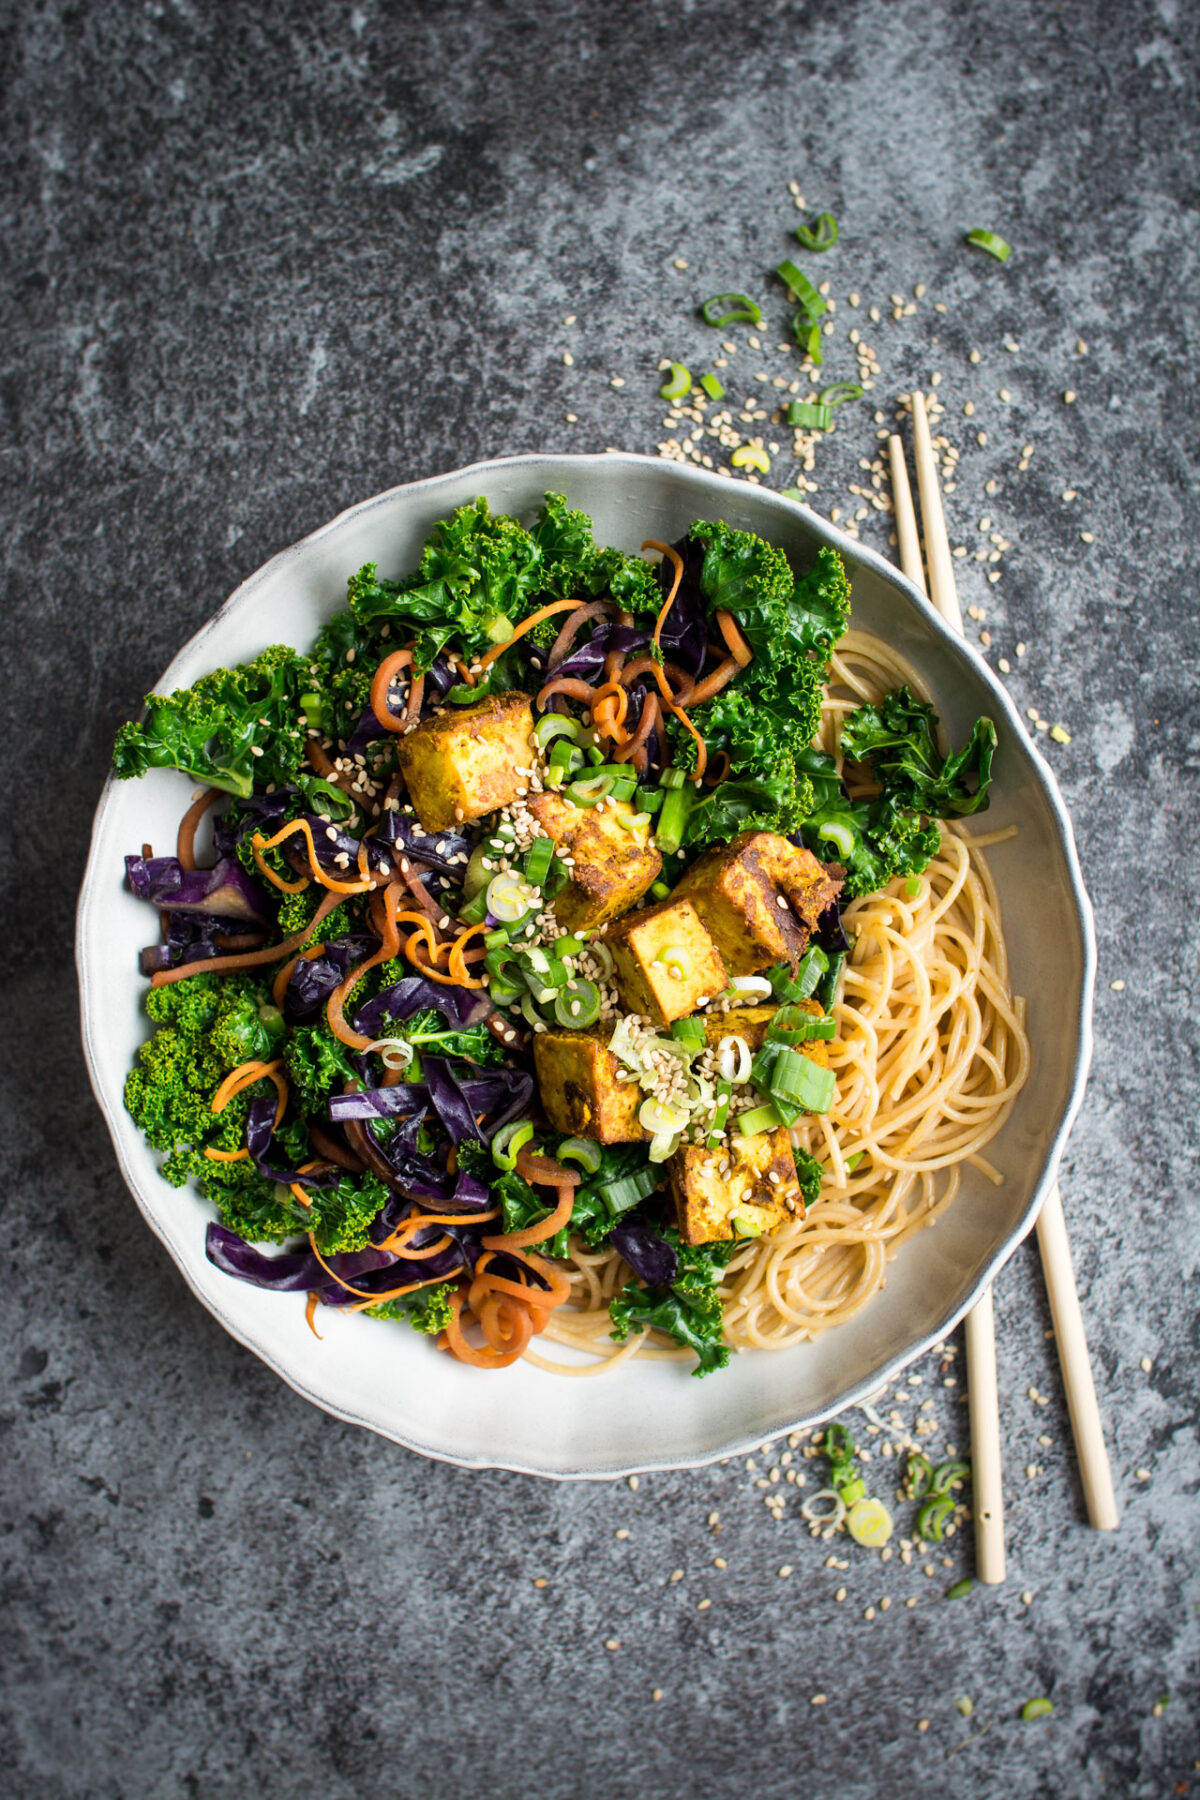 A nutritious kale stir fry with crispy curried tofu, perfect for a quick weeknight fix!